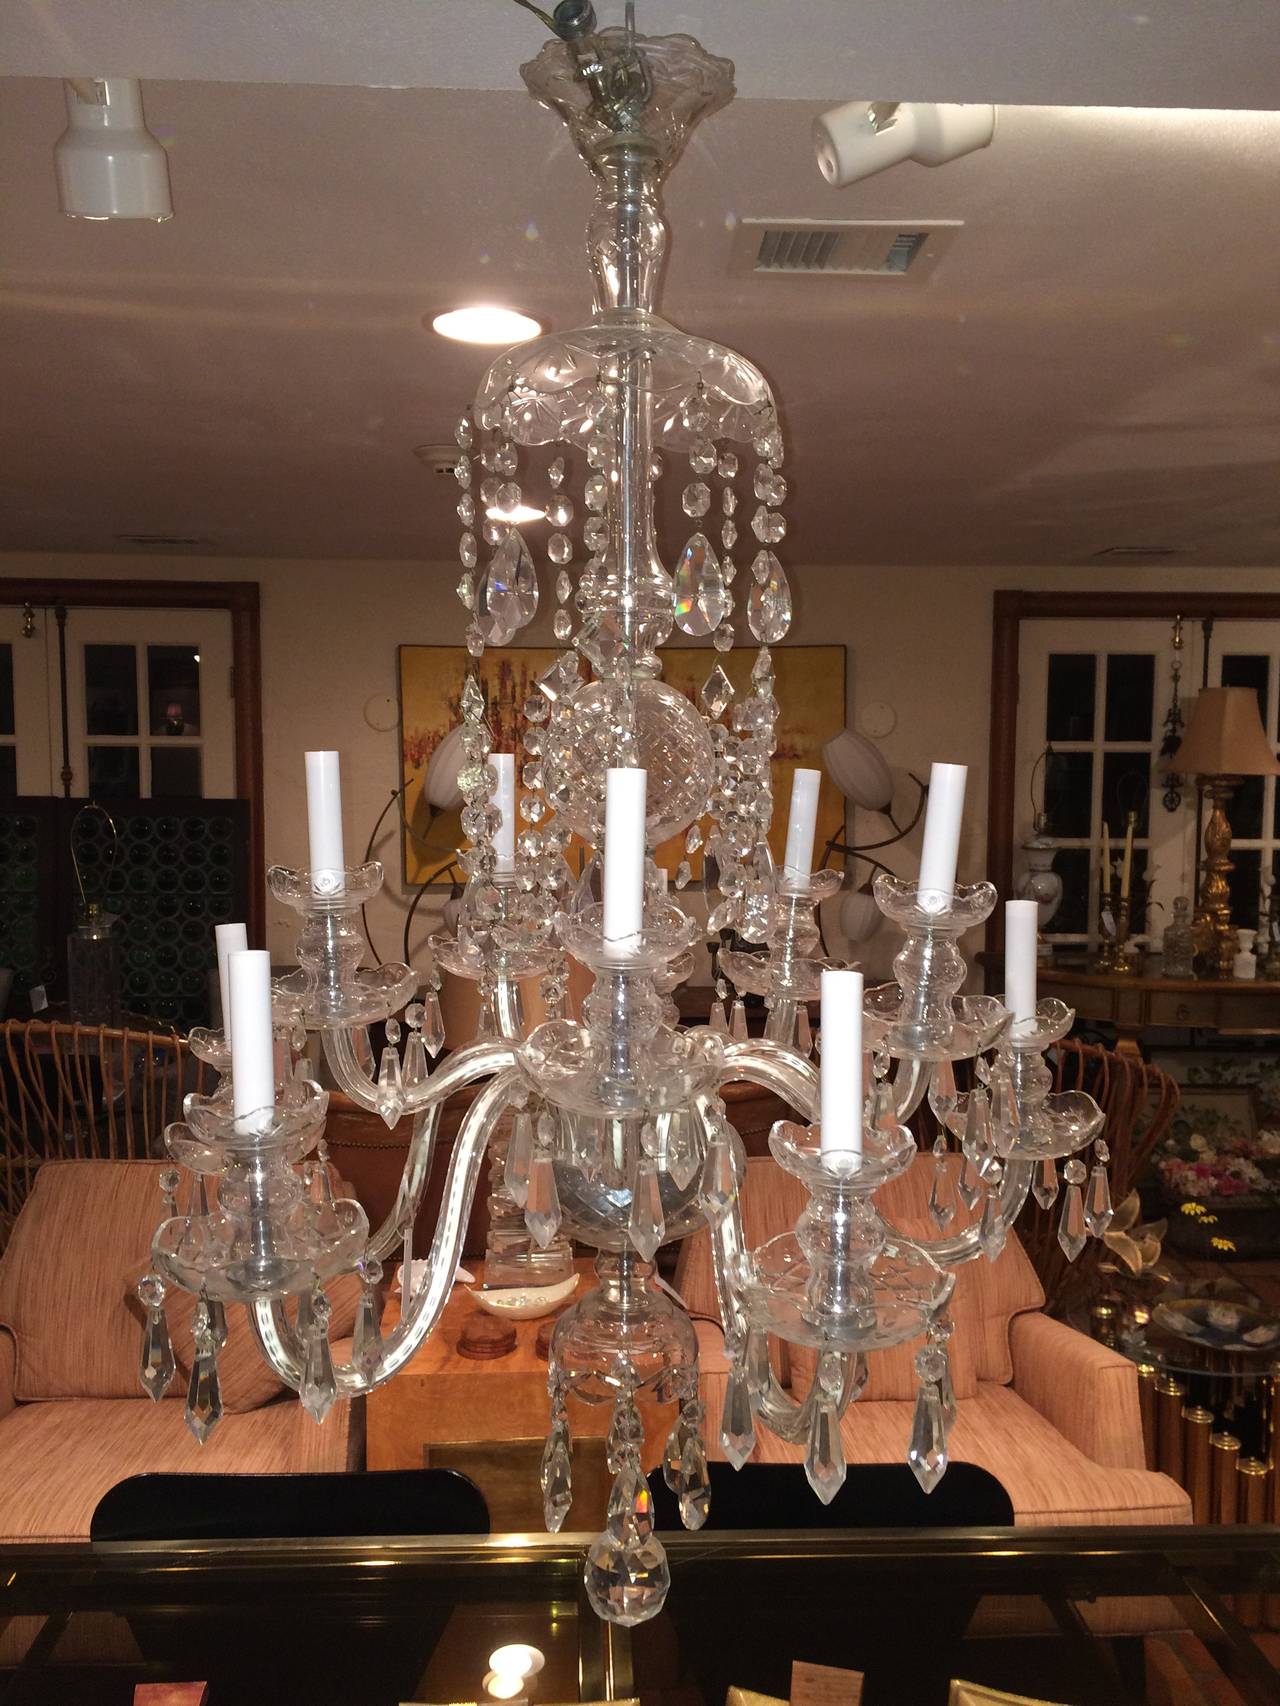 Elegant Ten Arm Crystal Chandelier attributed to Waterford. Draped with flowing crystals pendants and a faceted crystal ball pendant.